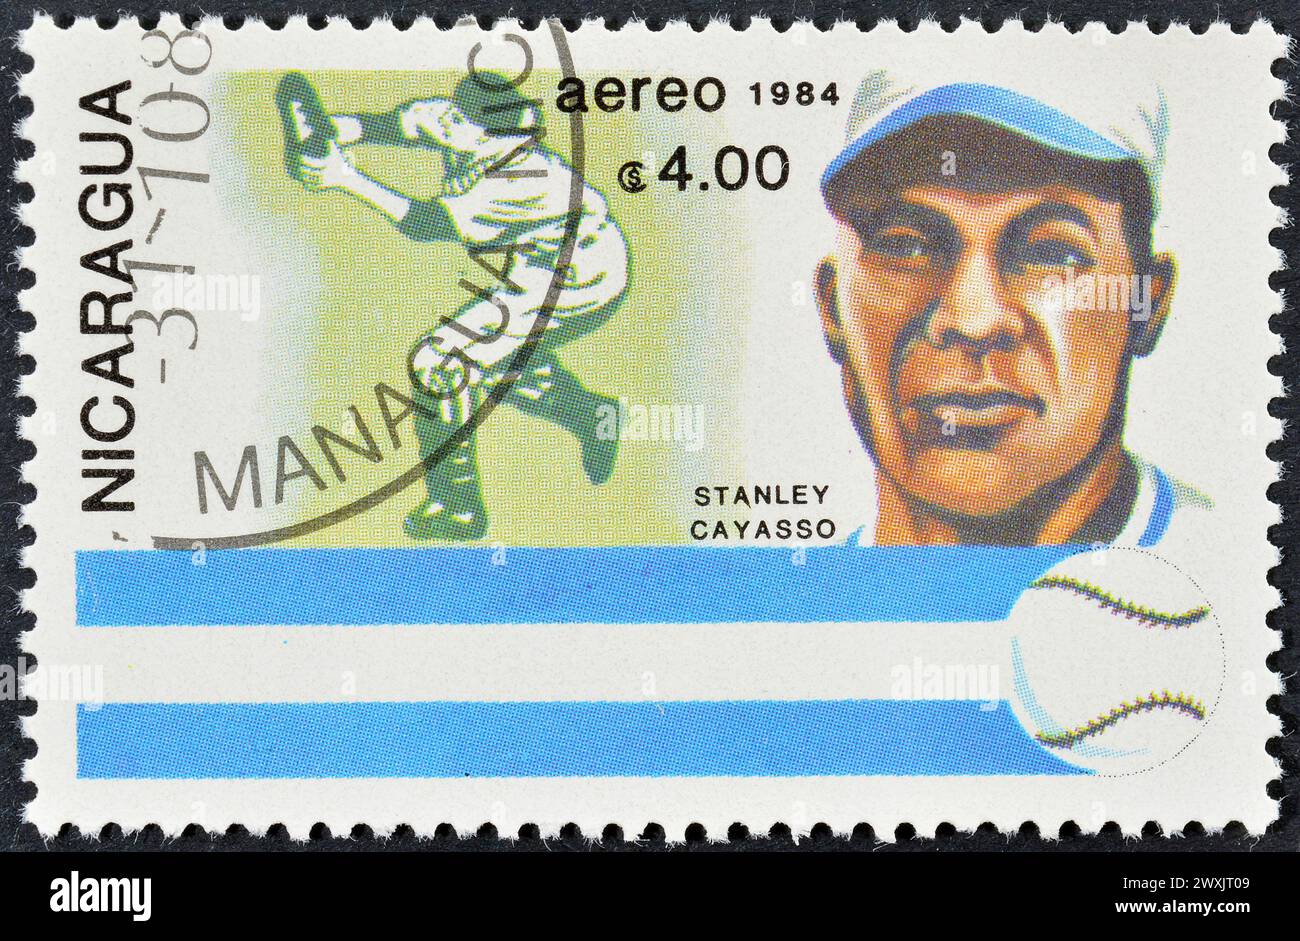 Cancelled postage stamp printed by Nicaragua, that shows Baseball Player Stanley Cayasso (Argentina), circa 1984. Stock Photo